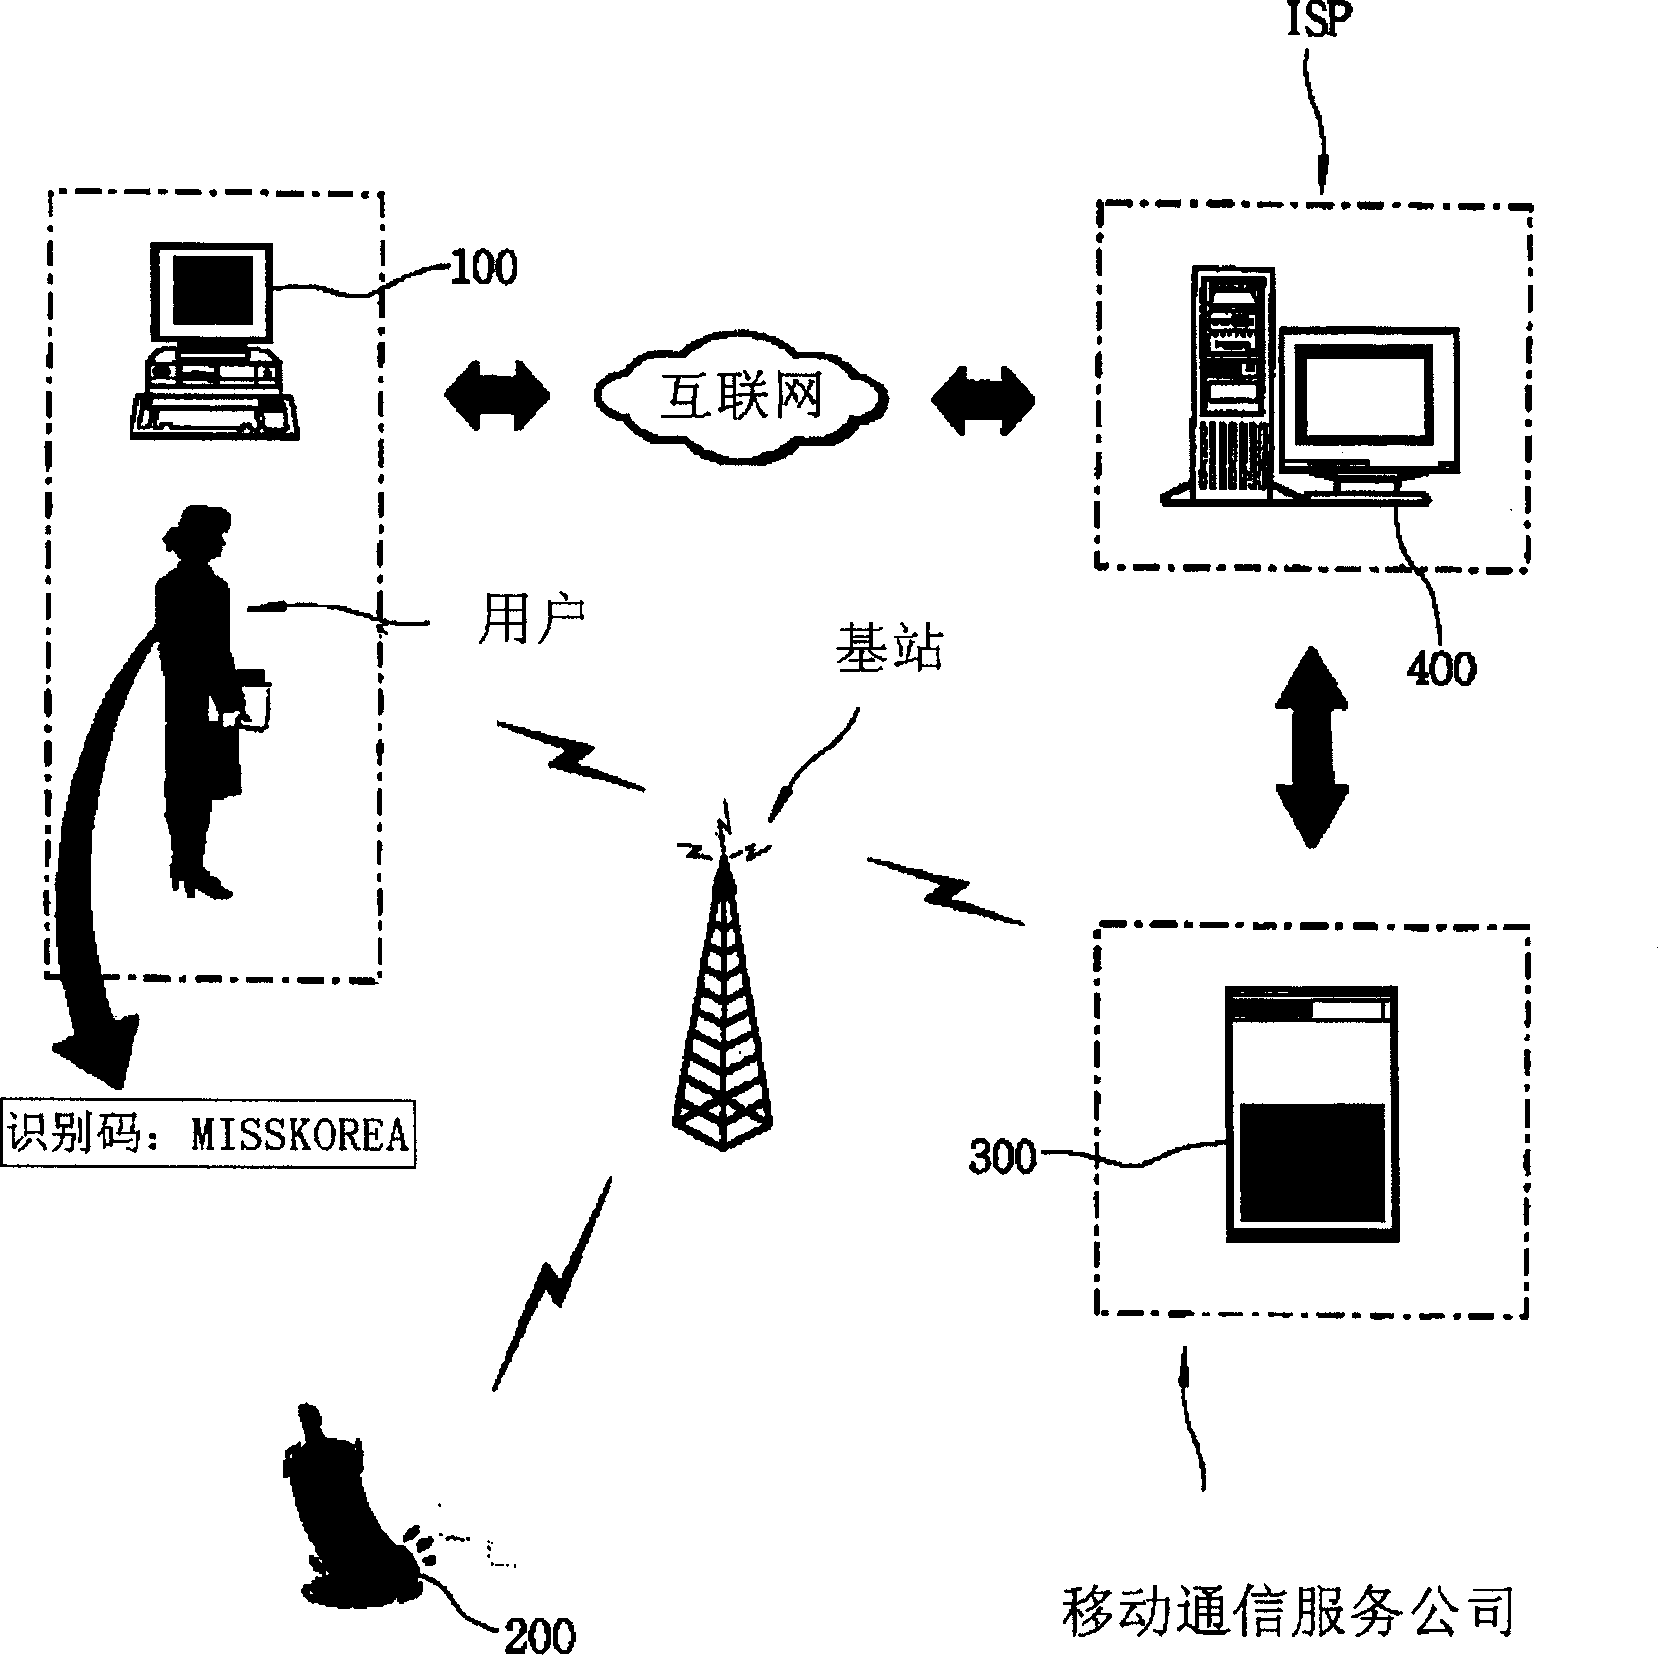 Method of transmitting message by means of identification codes printed on articles